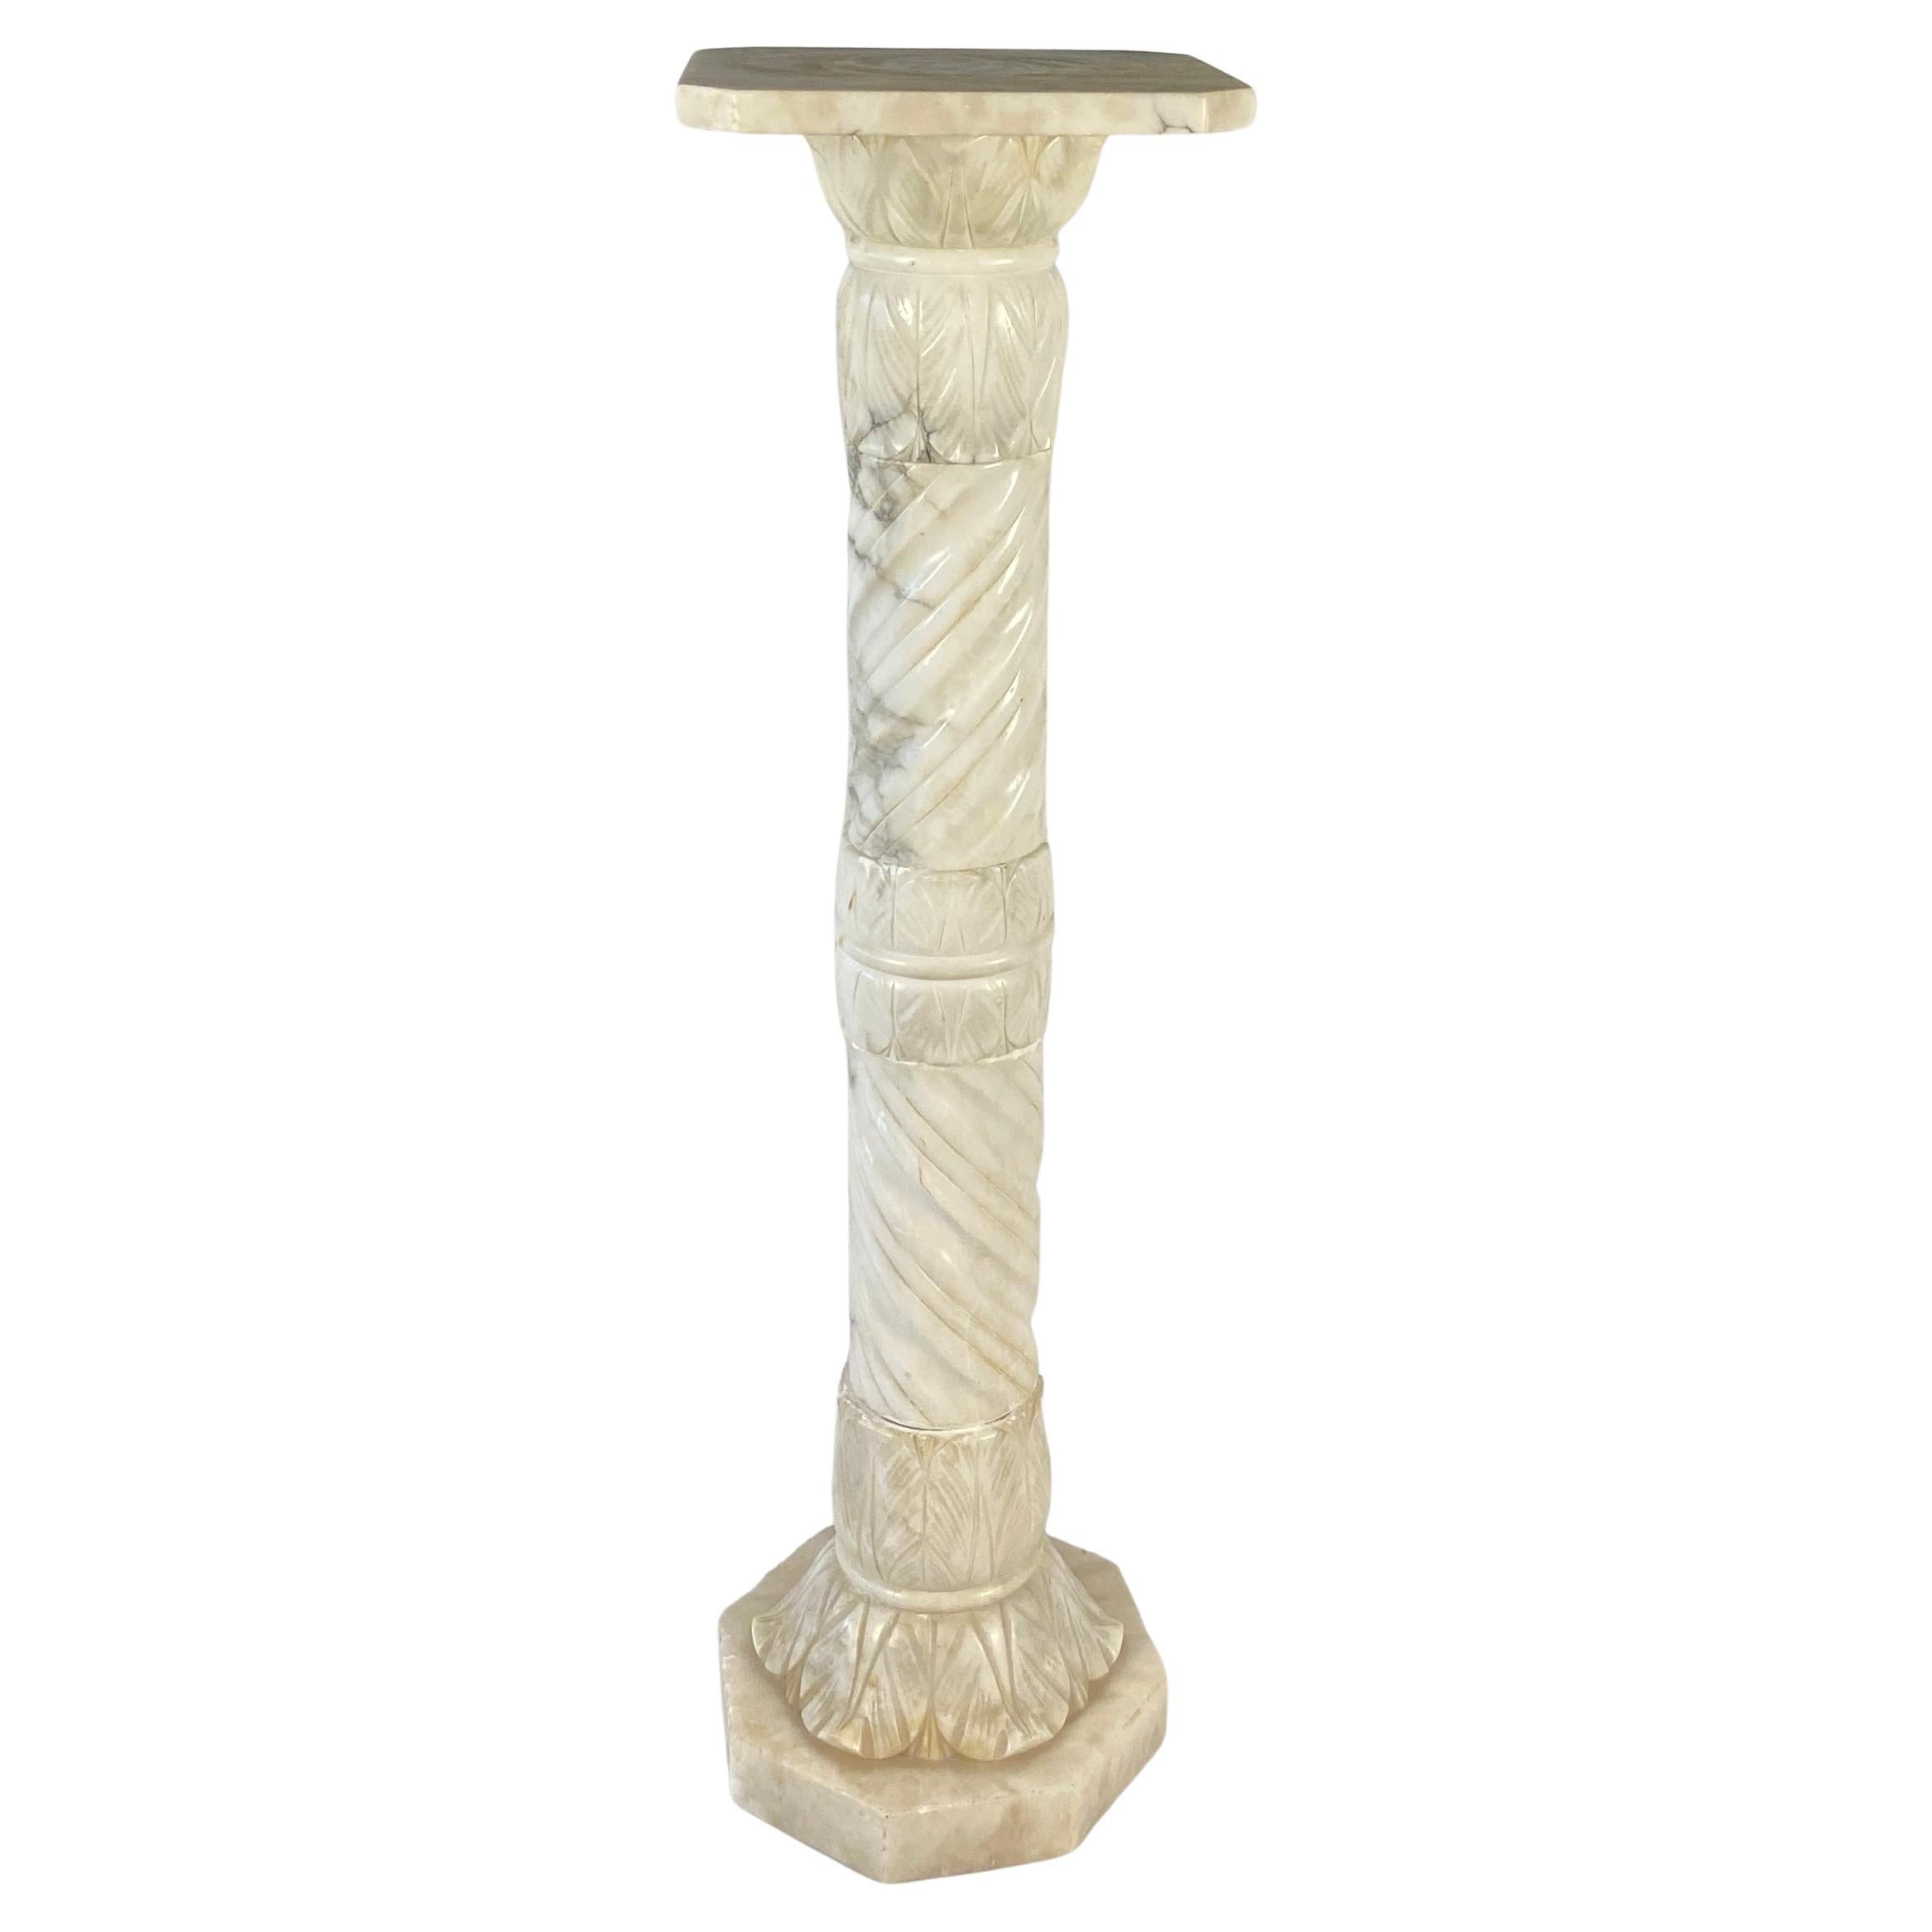 19th Century Italian Hand-Carved Carrara Marble Pedestal or Decorative Stand For Sale